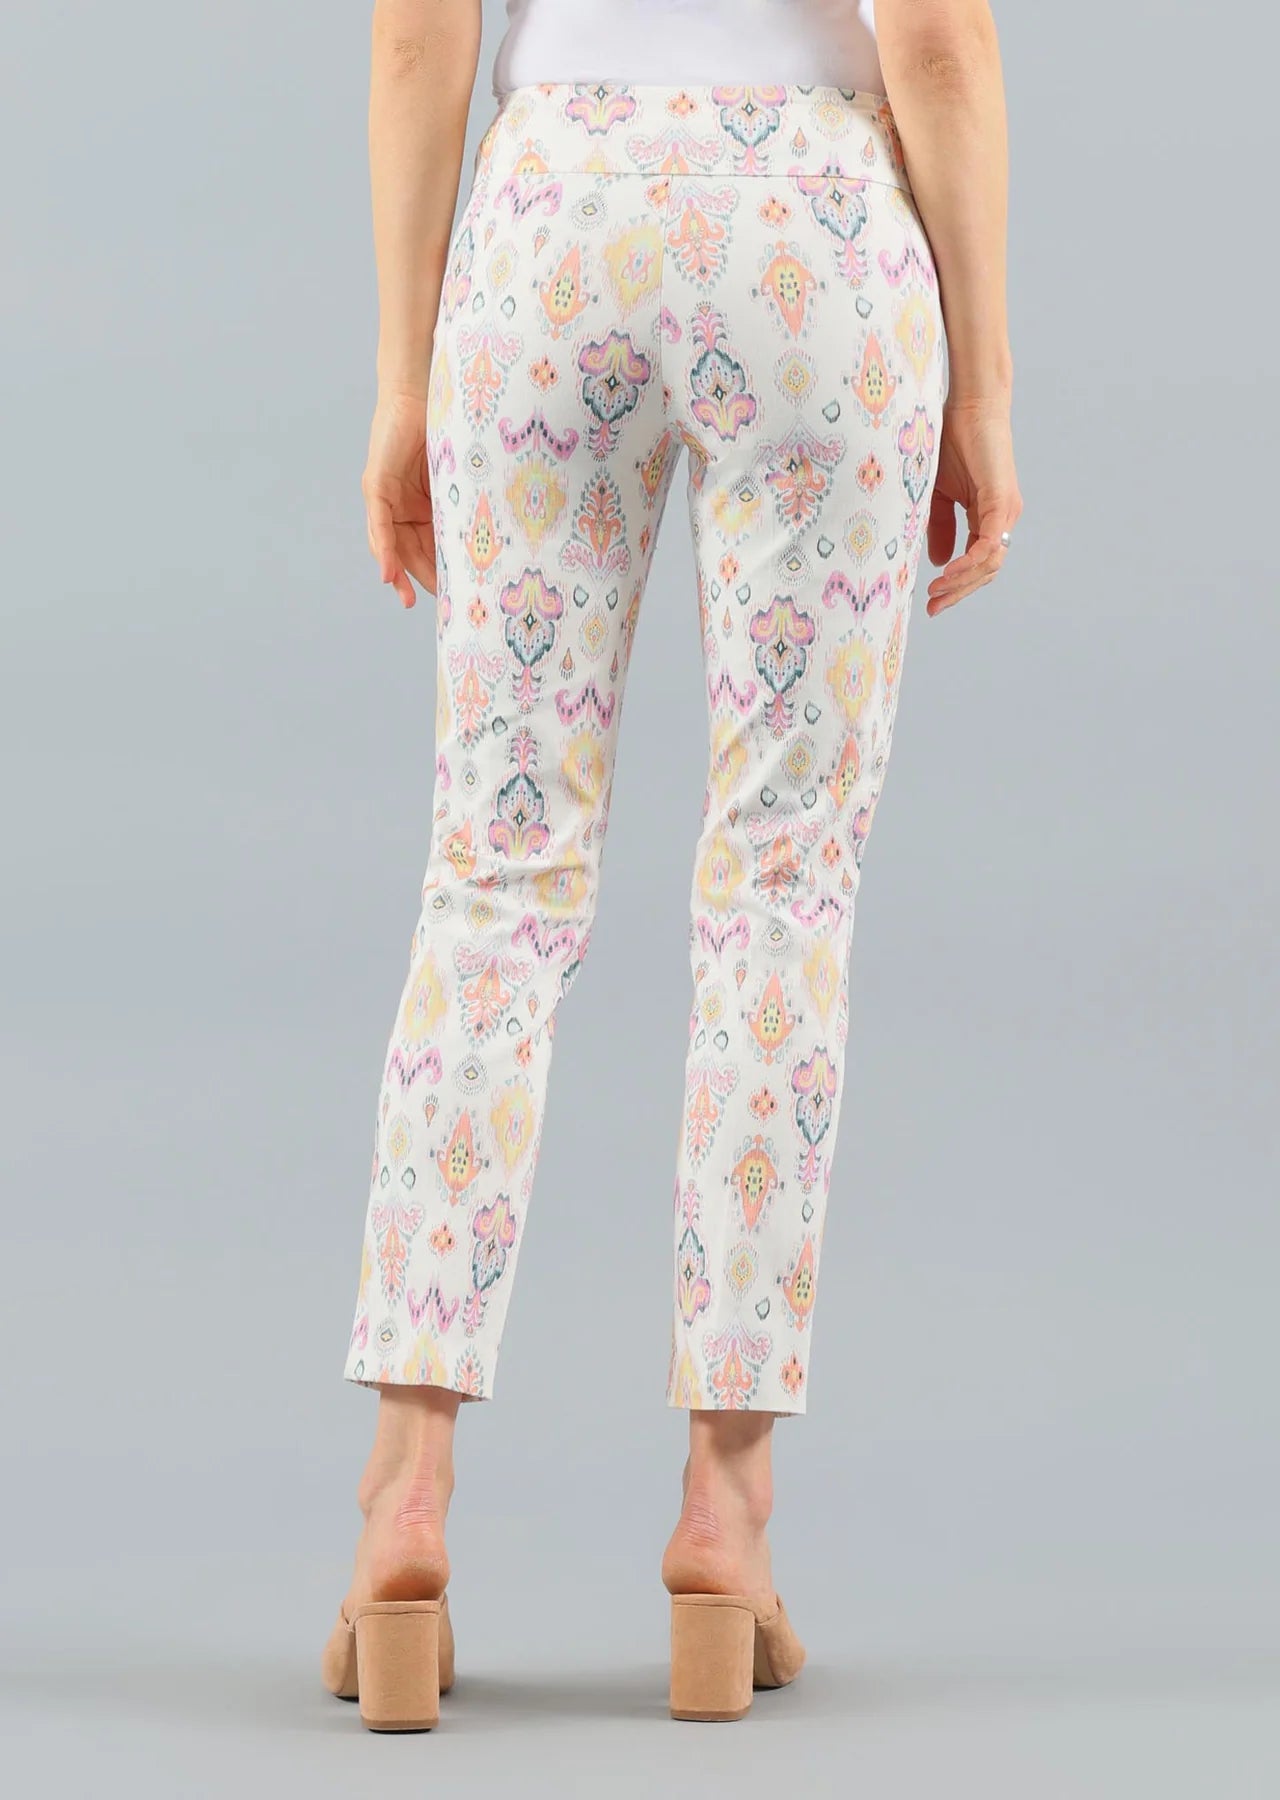 Lisette Almos Colorful Ikat Pattern Print Ankle Pants